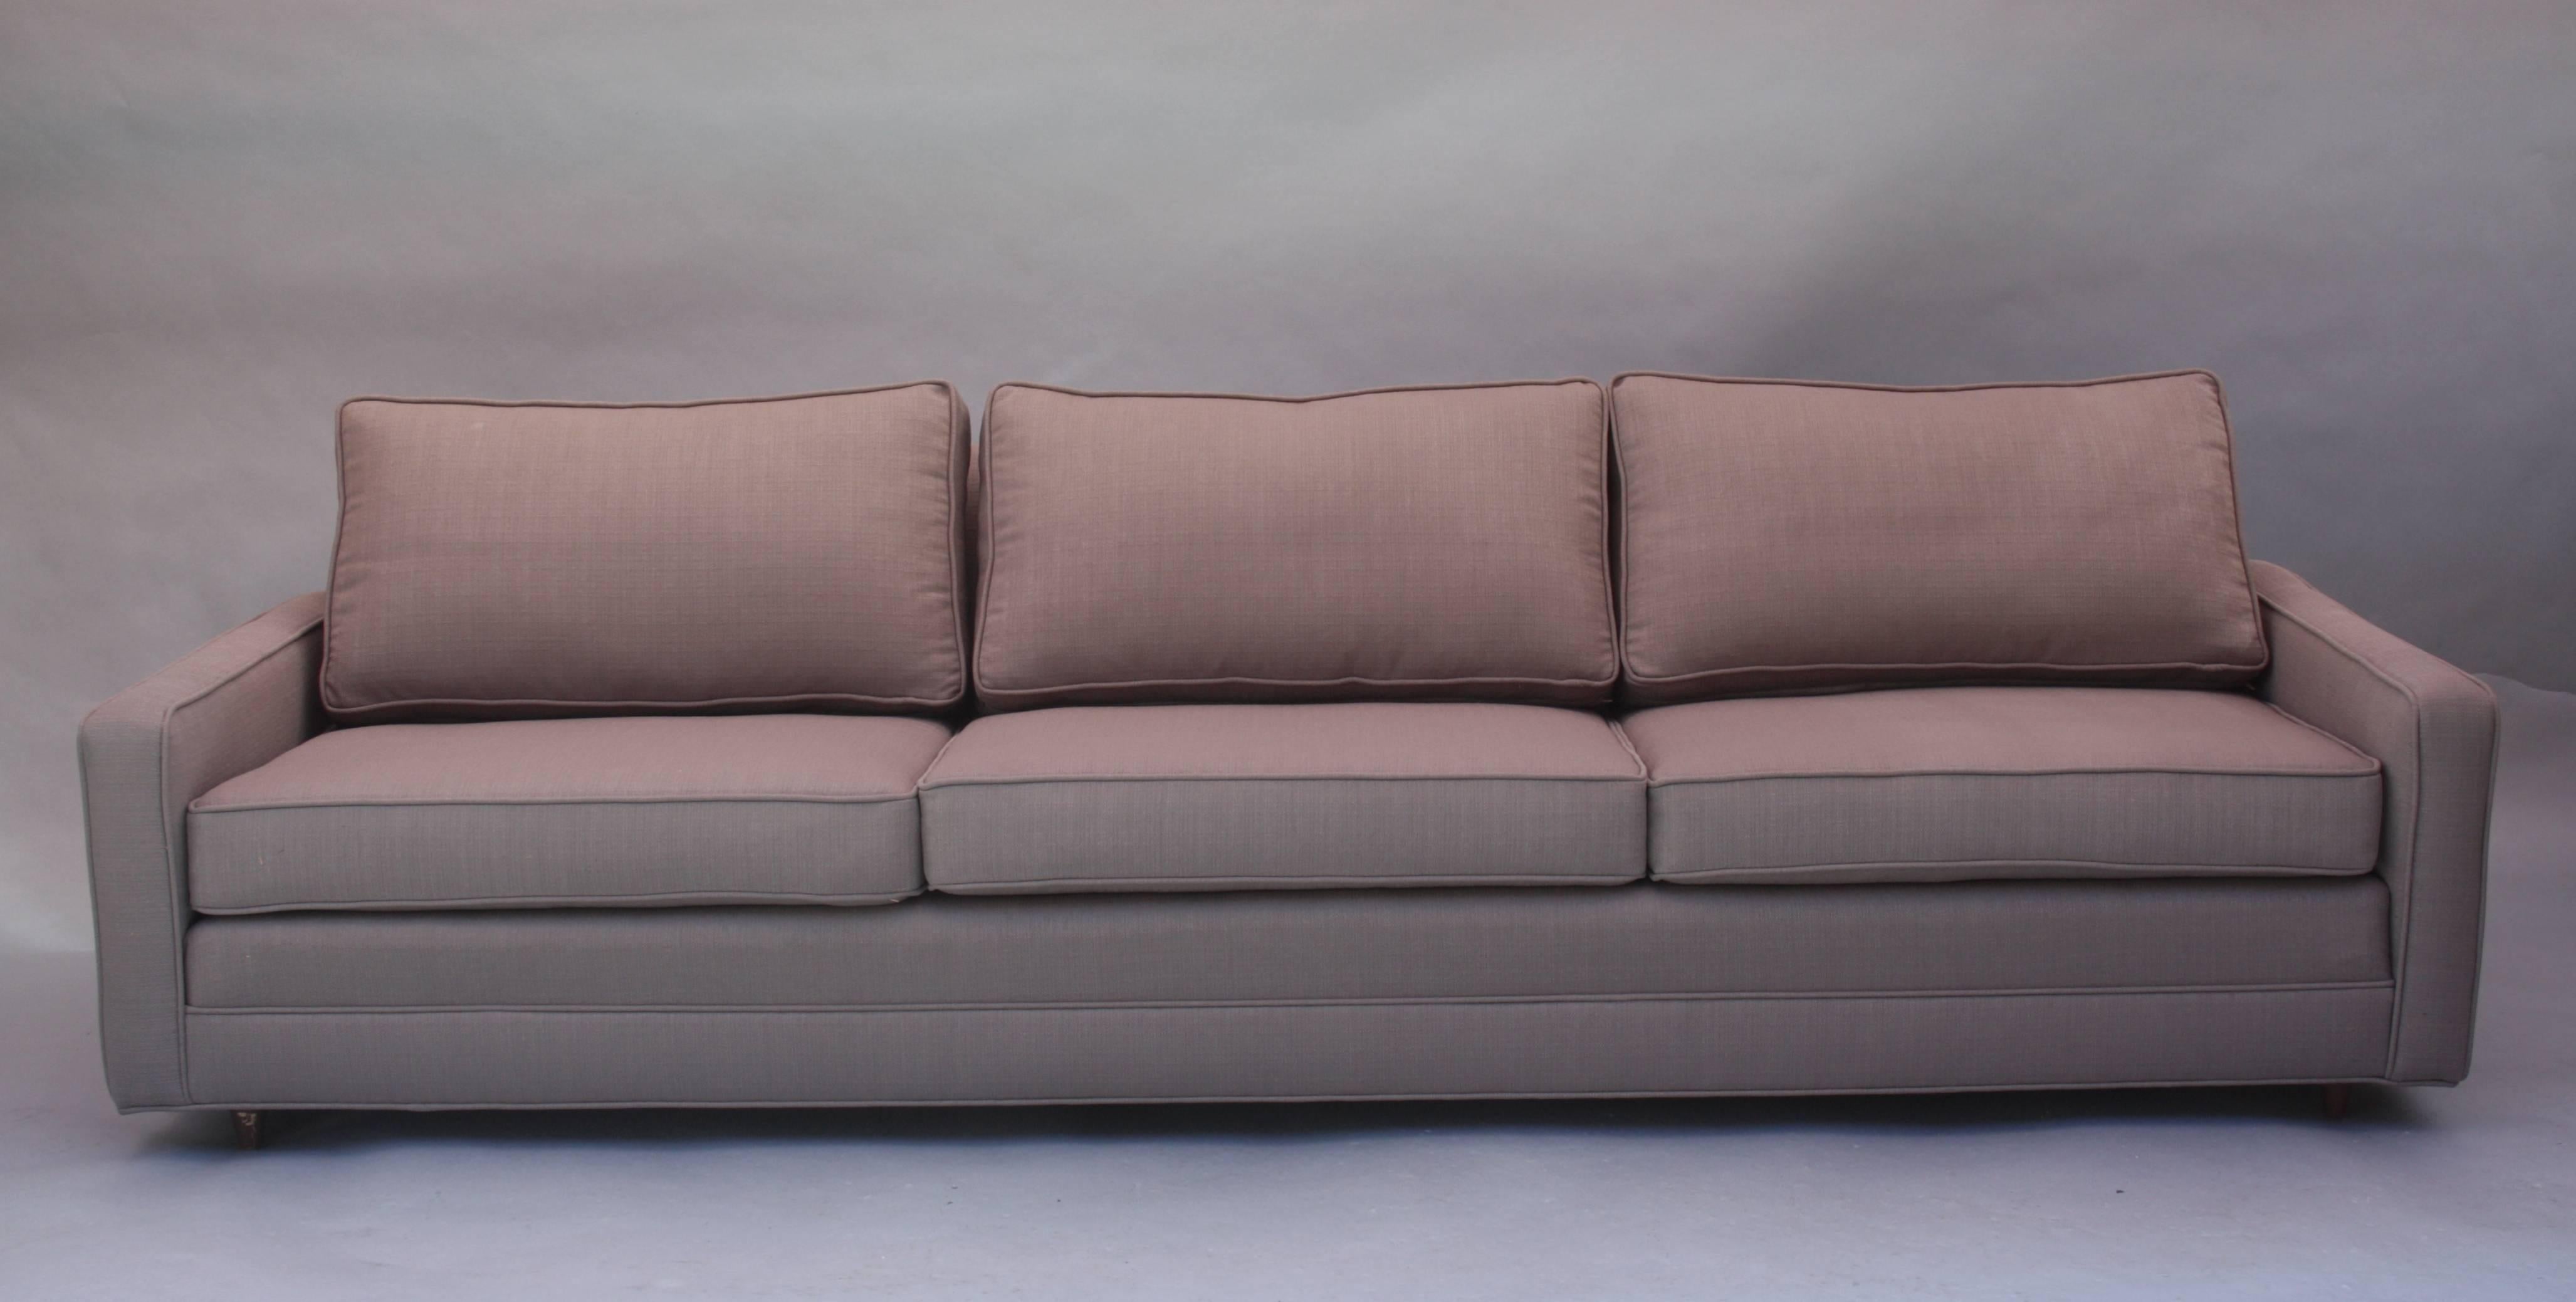 Mid-Century Modern sofa with new beige upholstery. We also have a coordinating armchair, sold separately.